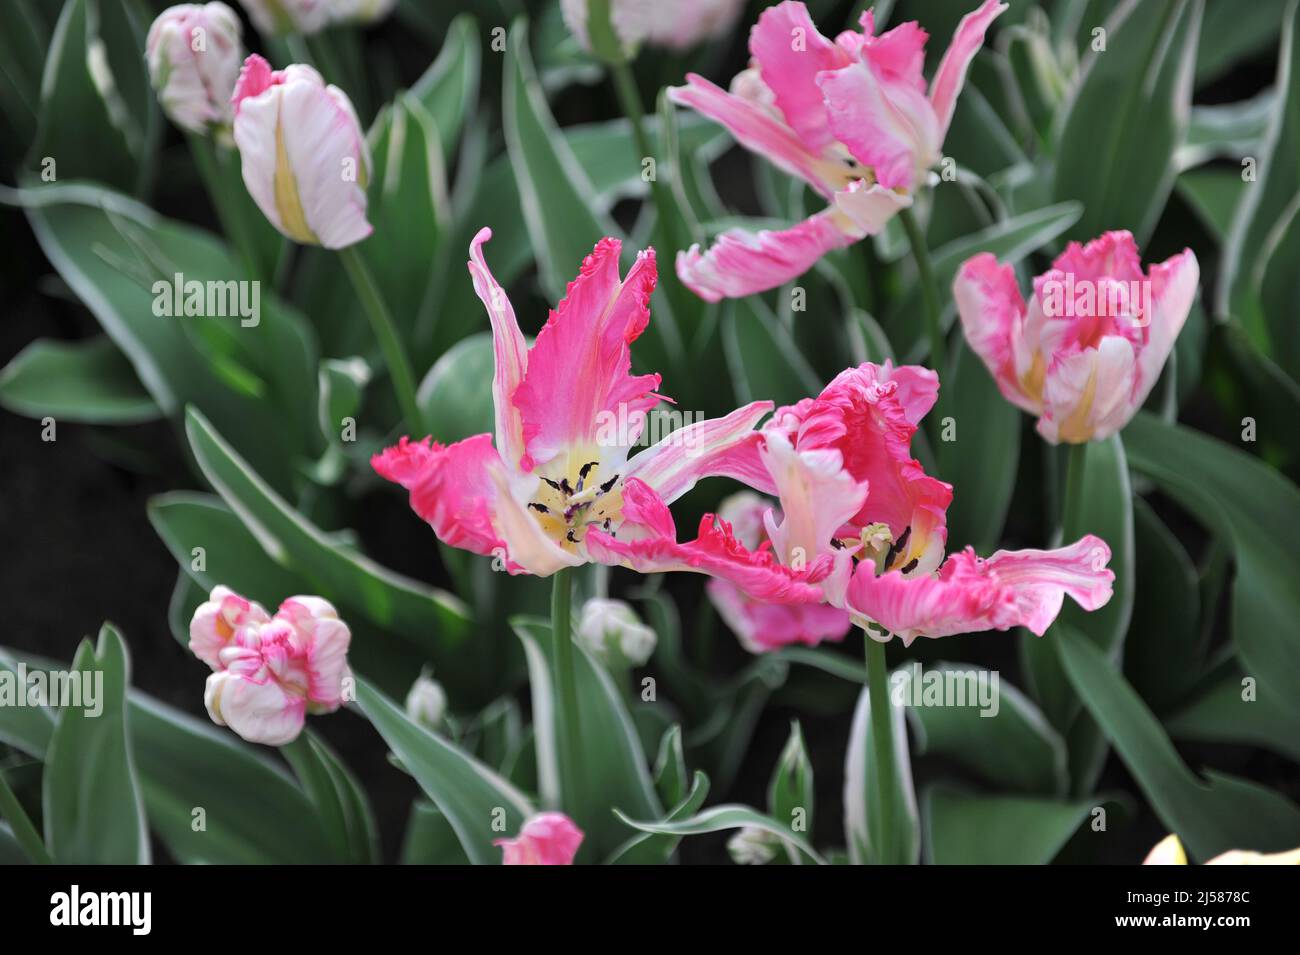 Pink and white parrot tulips (Tulipa) Forbidden City with wariegated foliage bloom in a garden in March Stock Photo